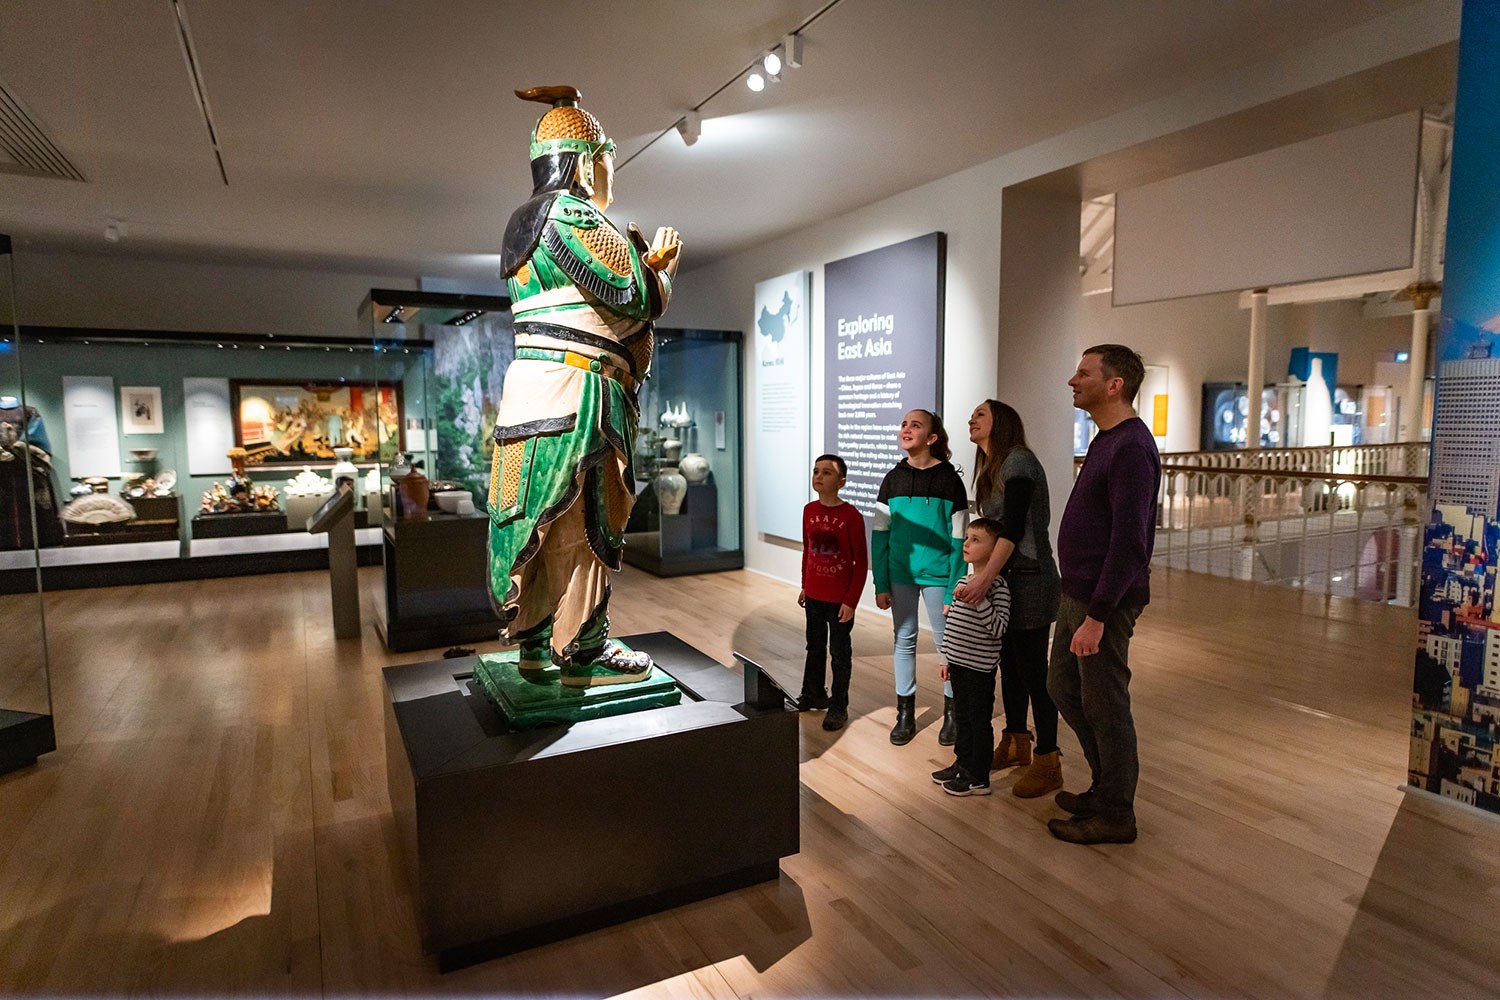 A family visiting the Exploring East Asia gallery on Level 5. 